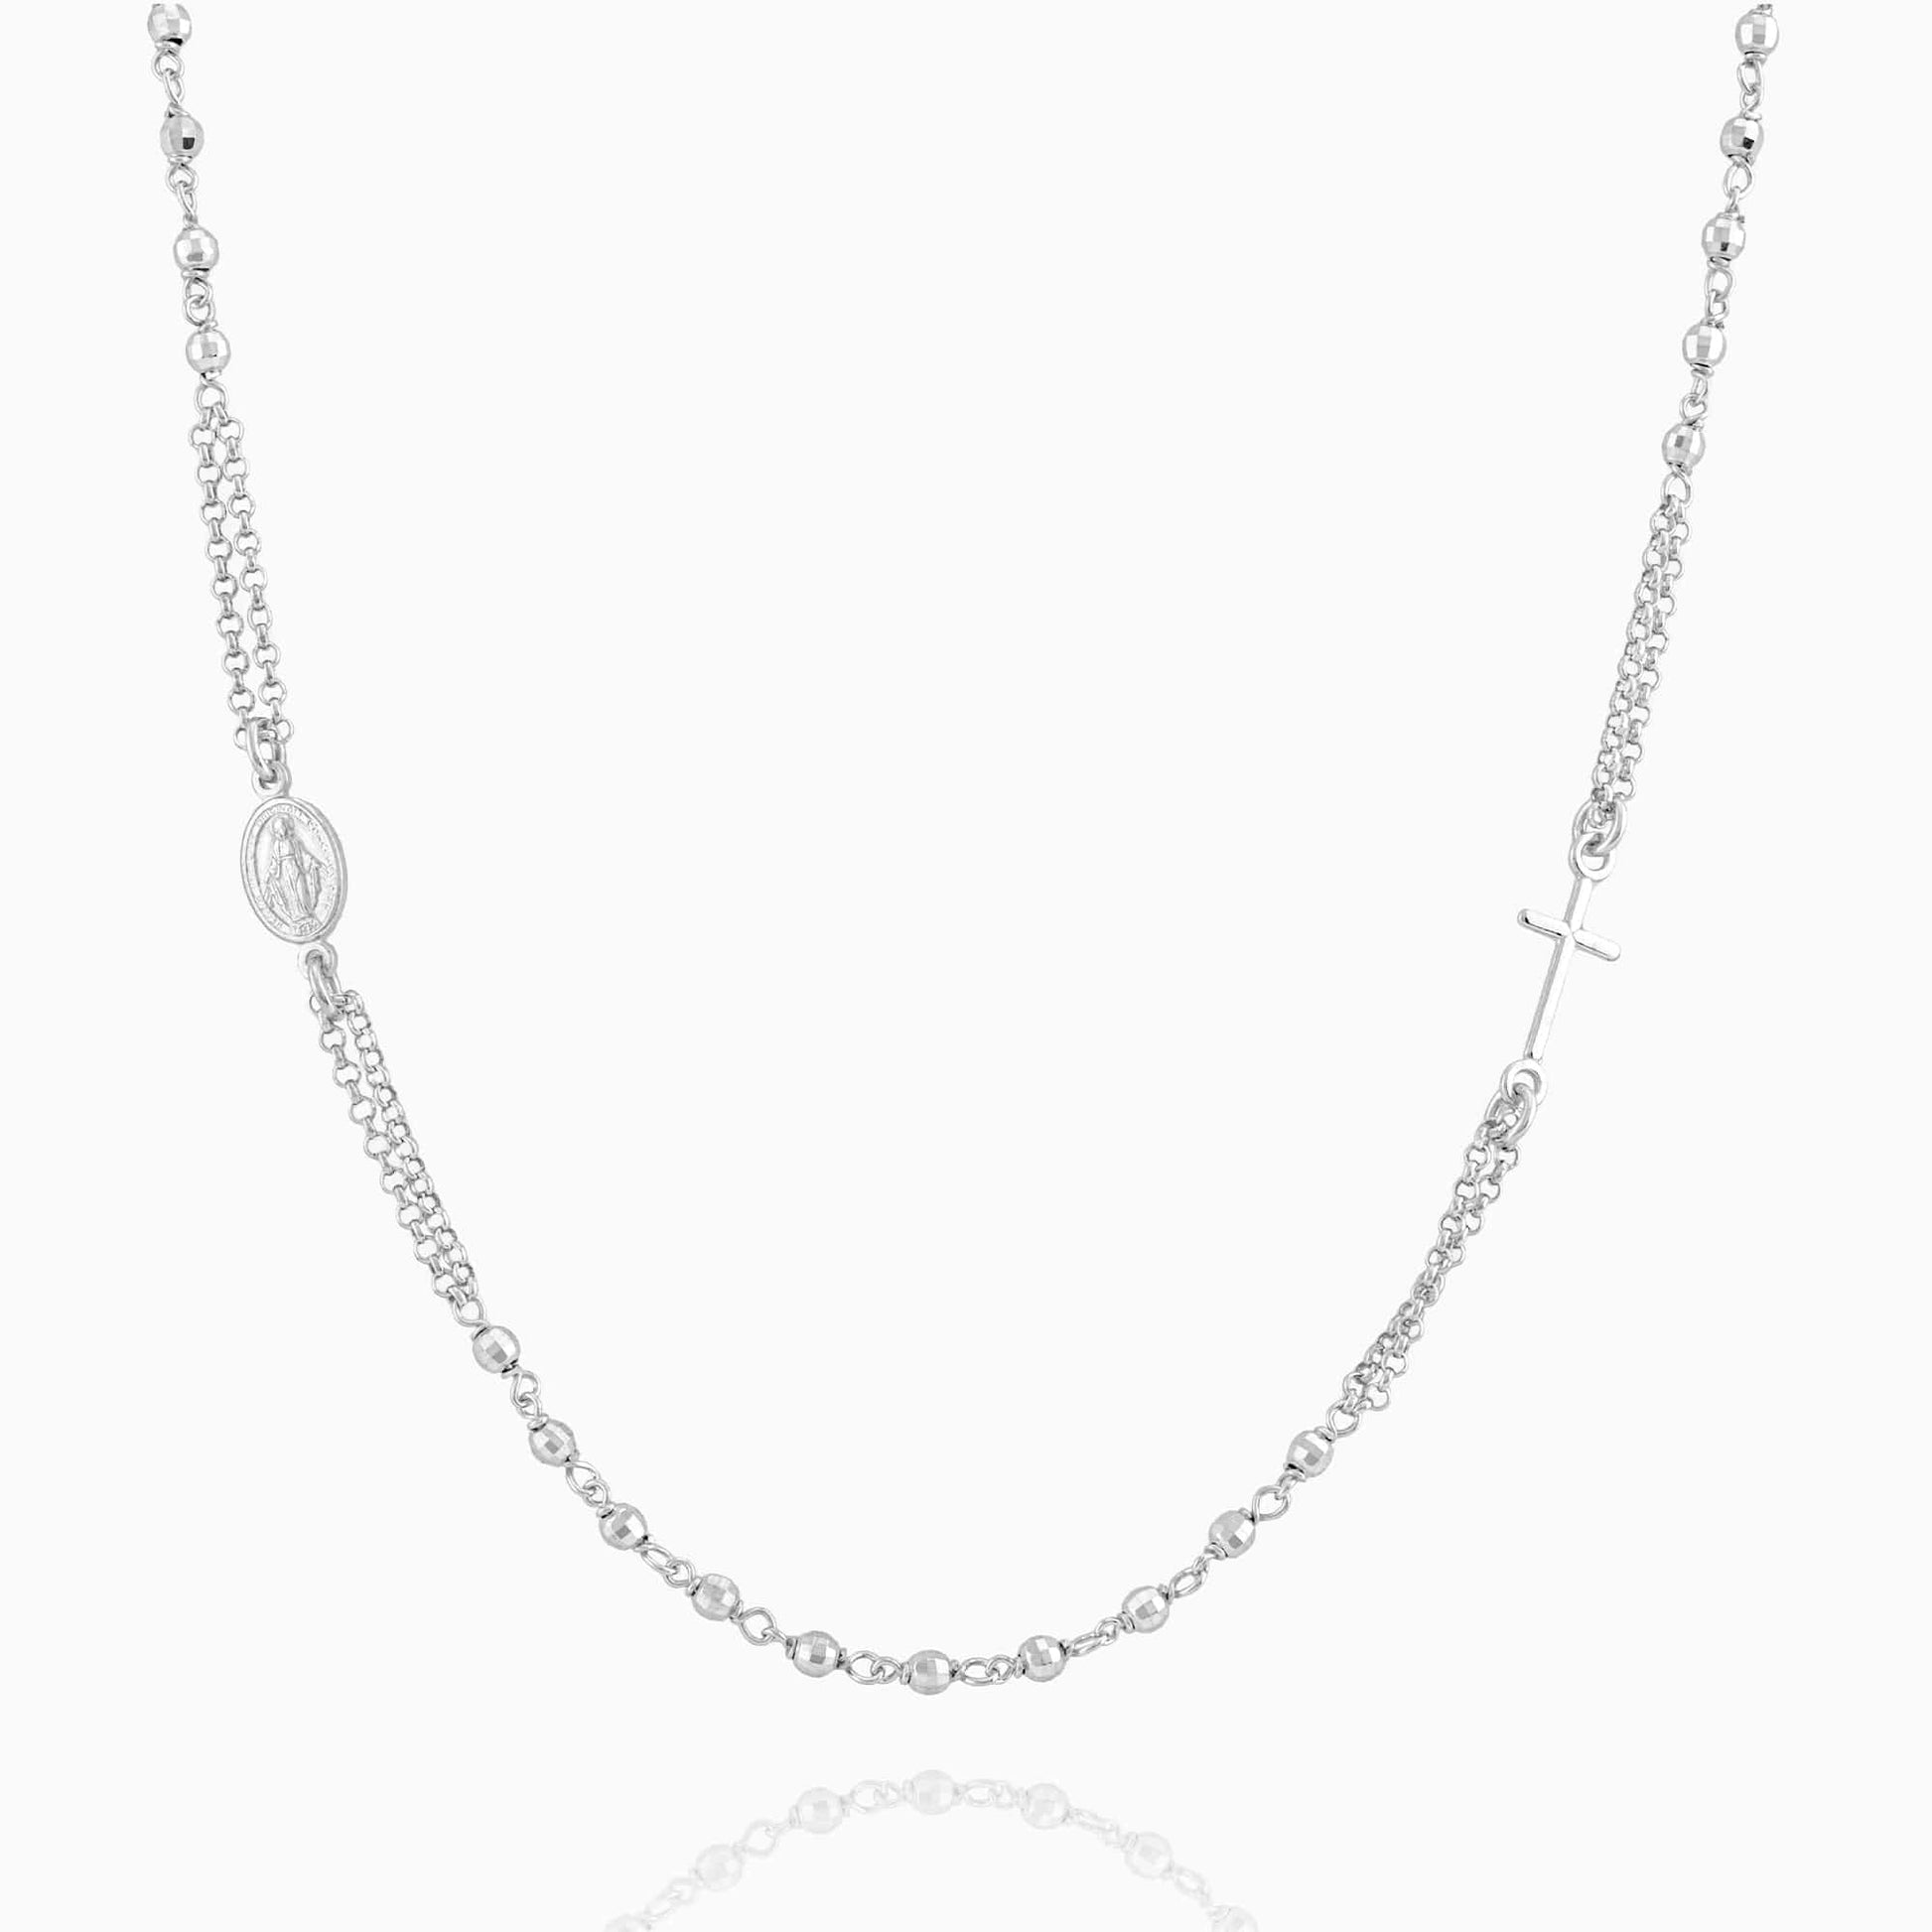 MONDO CATTOLICO Prayer Beads rhodium / Cm 46+5 (18.1 in+ 2) STERLING SILVER NECKLACE ROSARY WITH DISCO BEADS